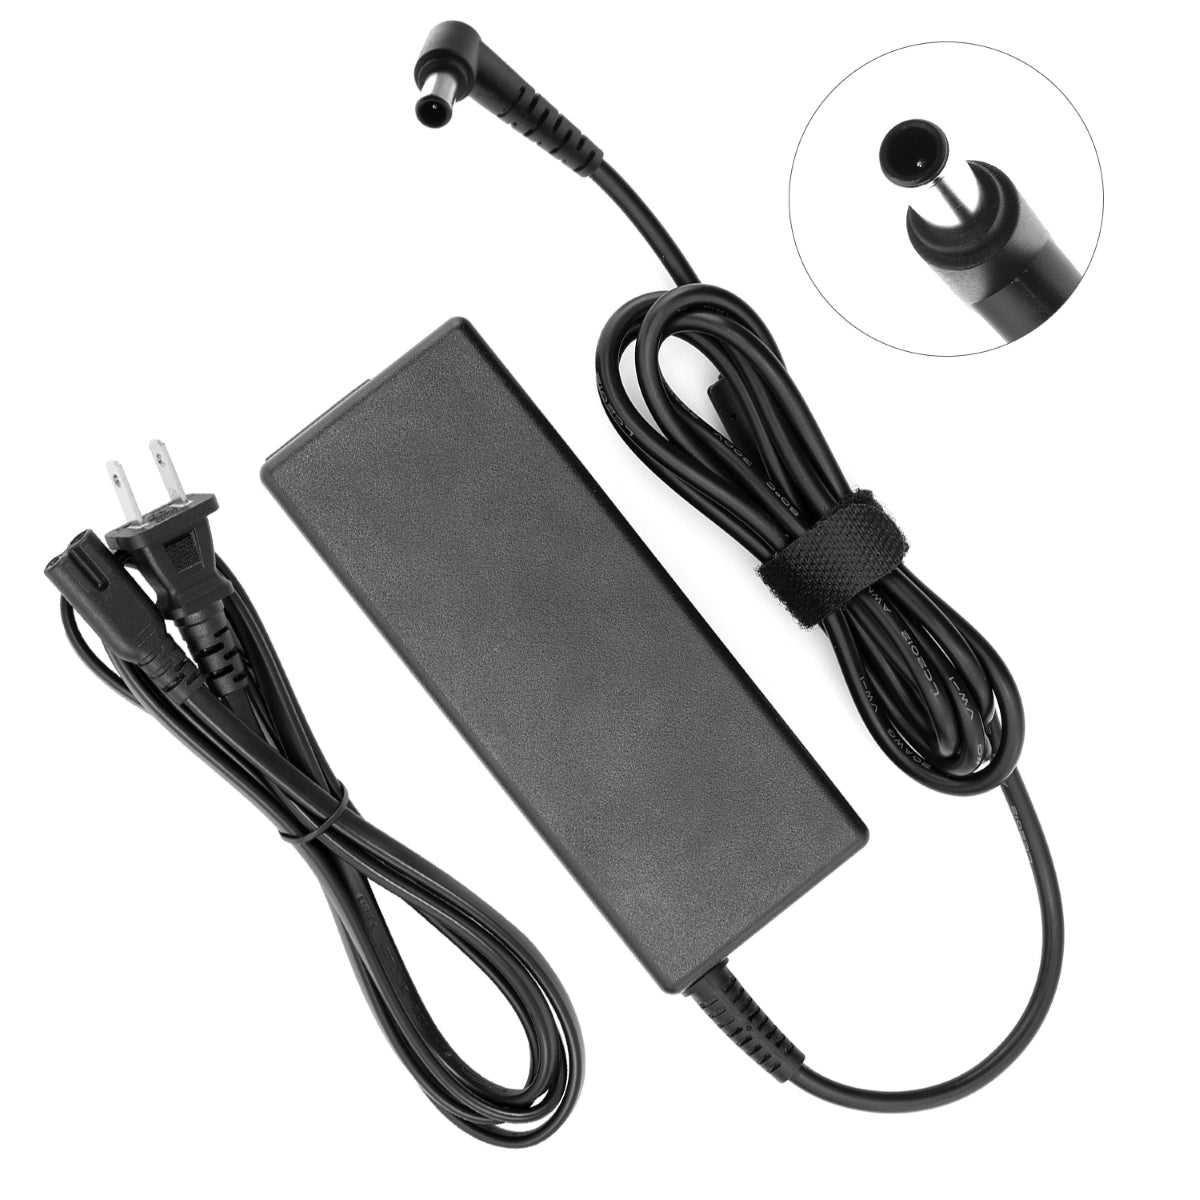 AC Adapter for LG 20EN33S-B Monitor